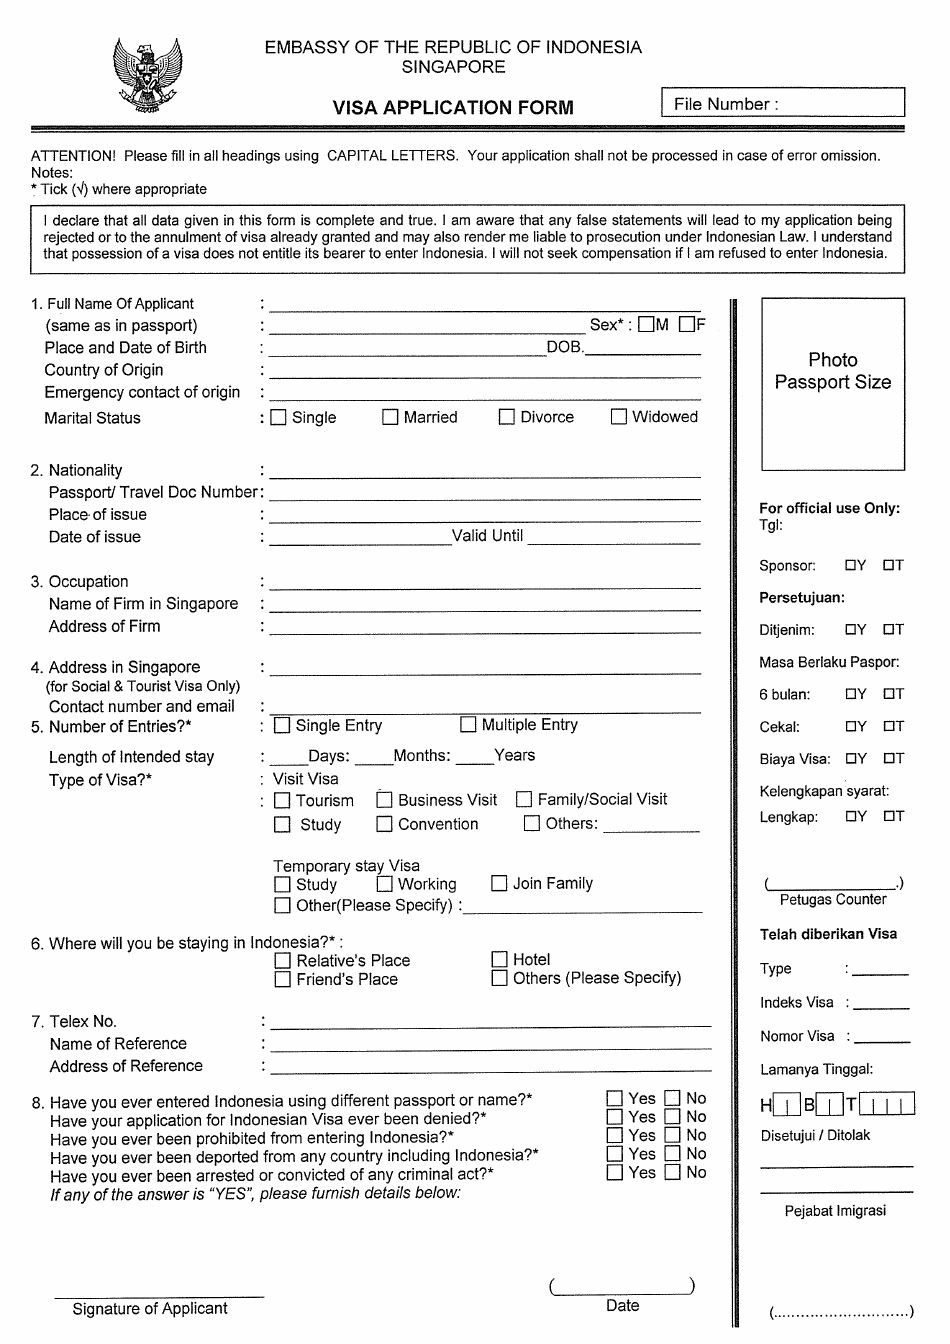 Indonesian Visa Application Form - Embassy of the Republic of Indonesia - Singapore, Page 1